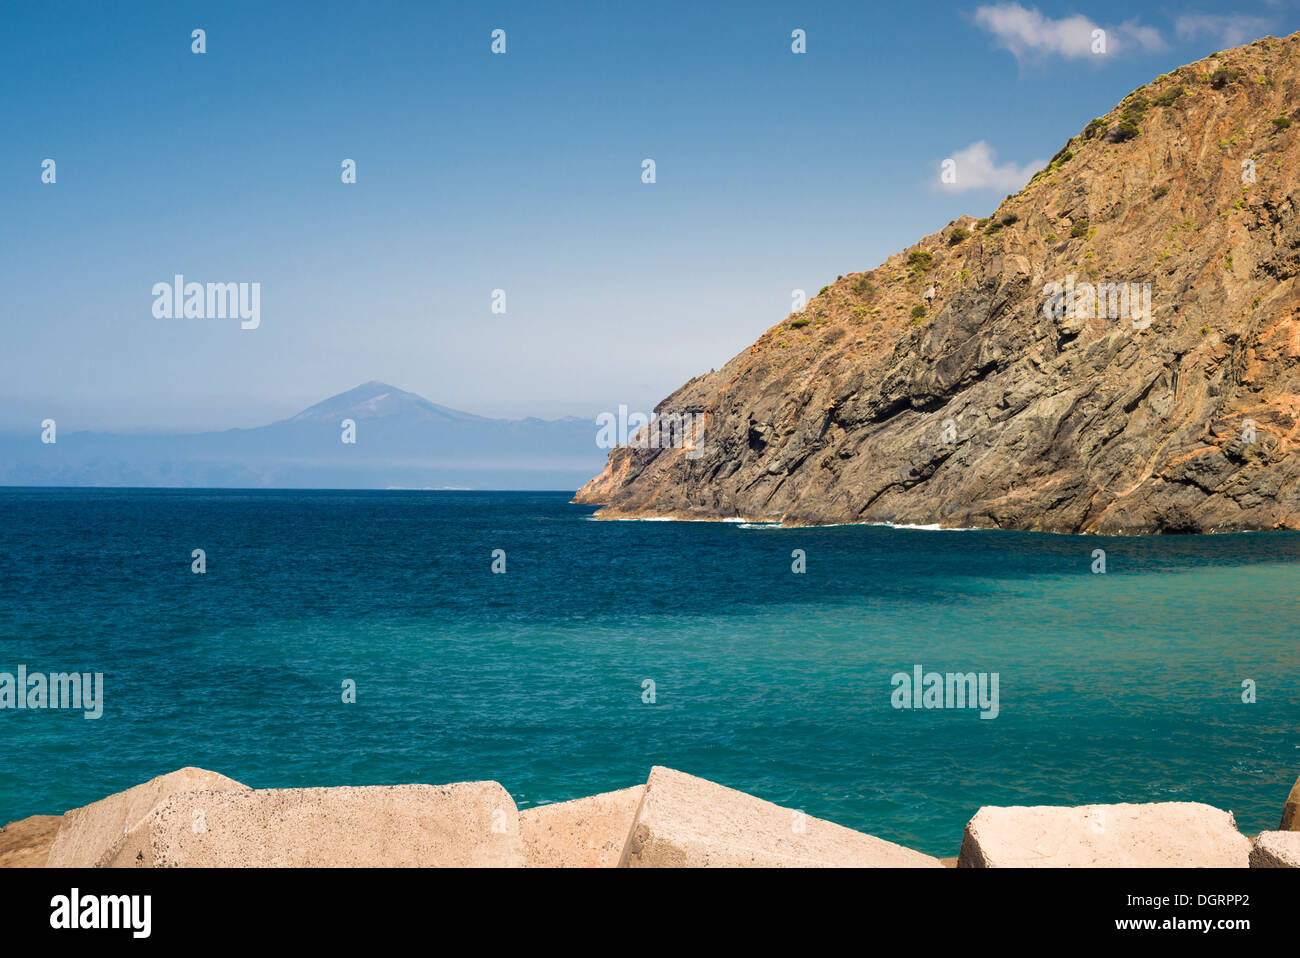 Coastal defence and rocky cliffs at Playa de Vallehermoso, La Gomera, with Teide Volcano on Tenerife visible in the background Stock Photo